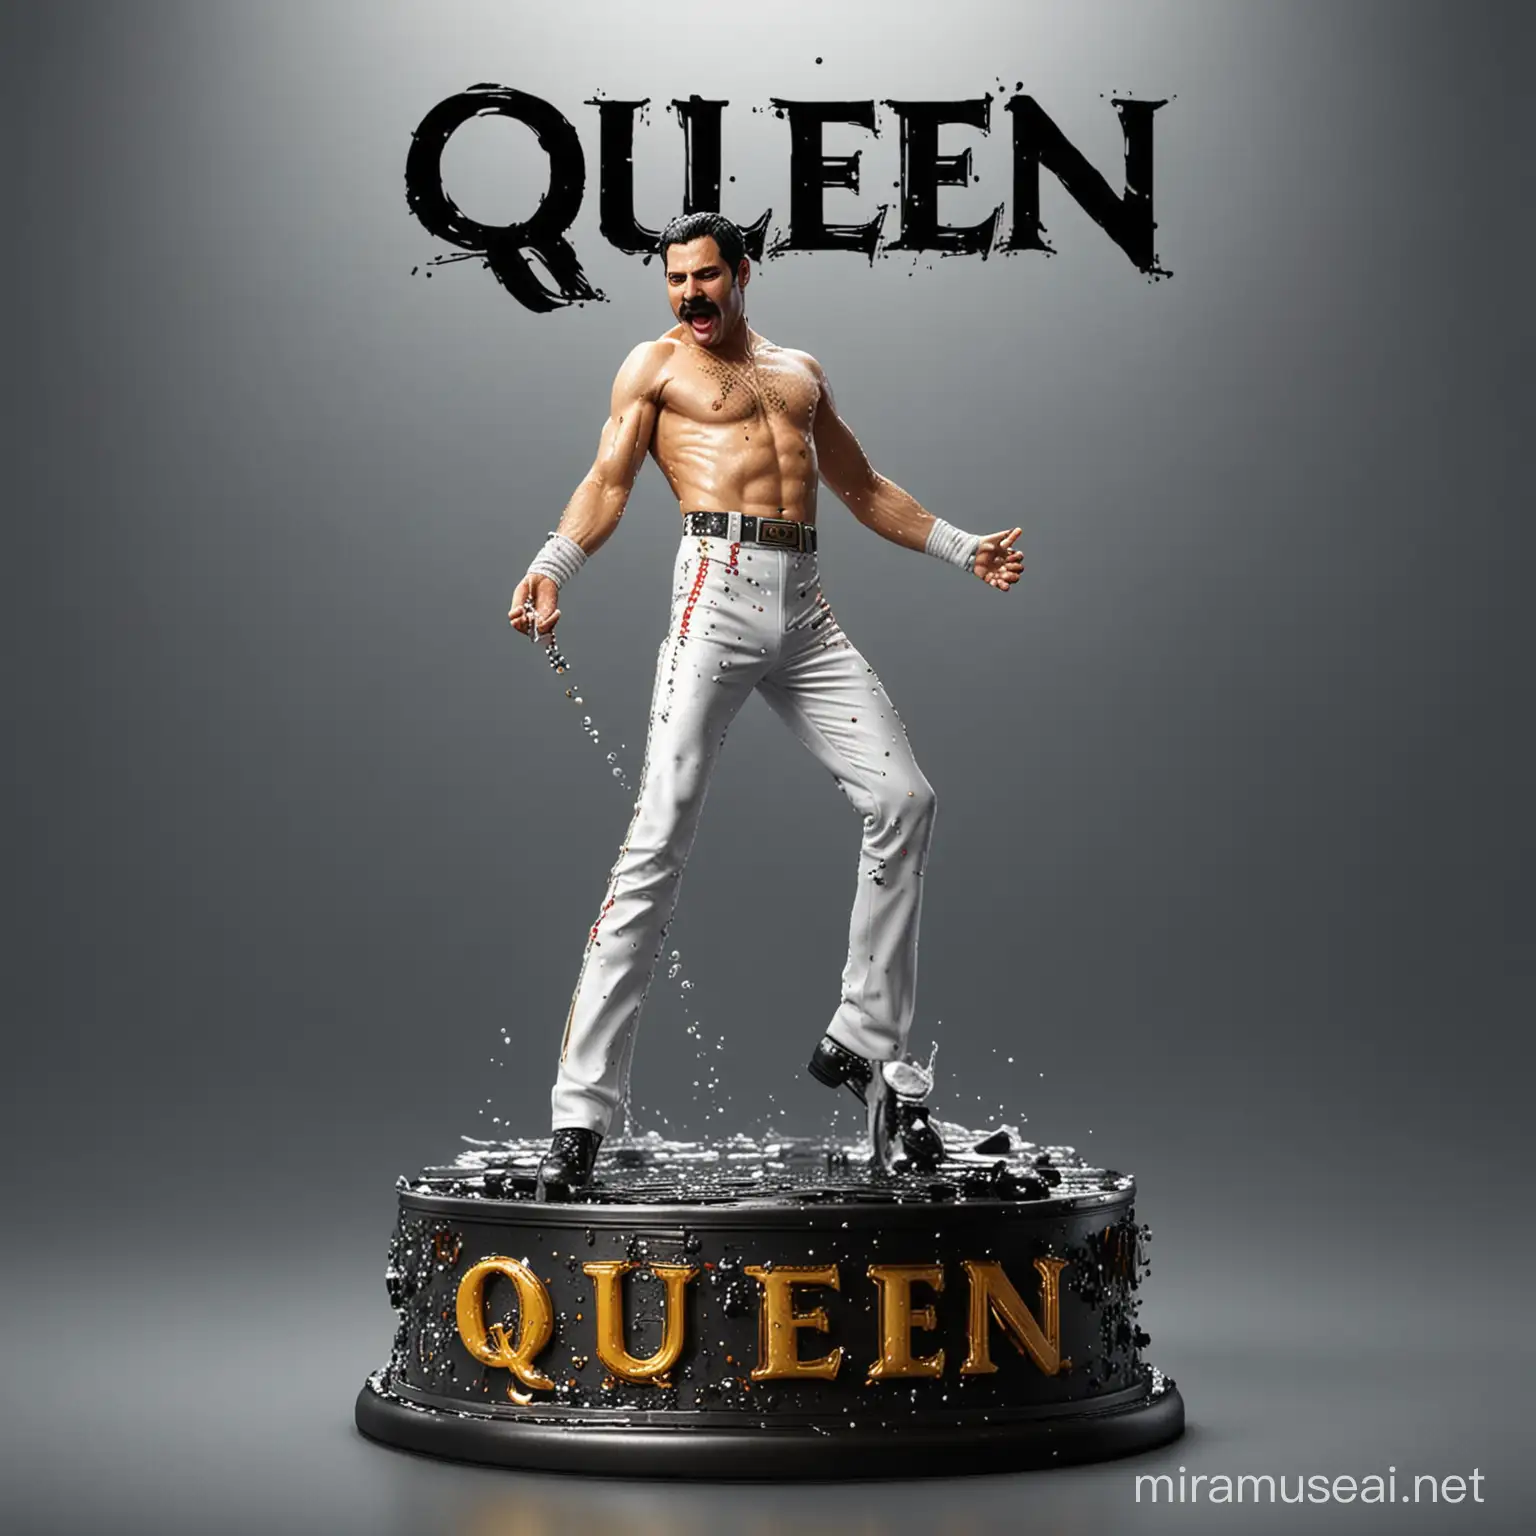 Freddie Mercury from Queen Performing on Metal Base with UltraRealistic Splash Effect